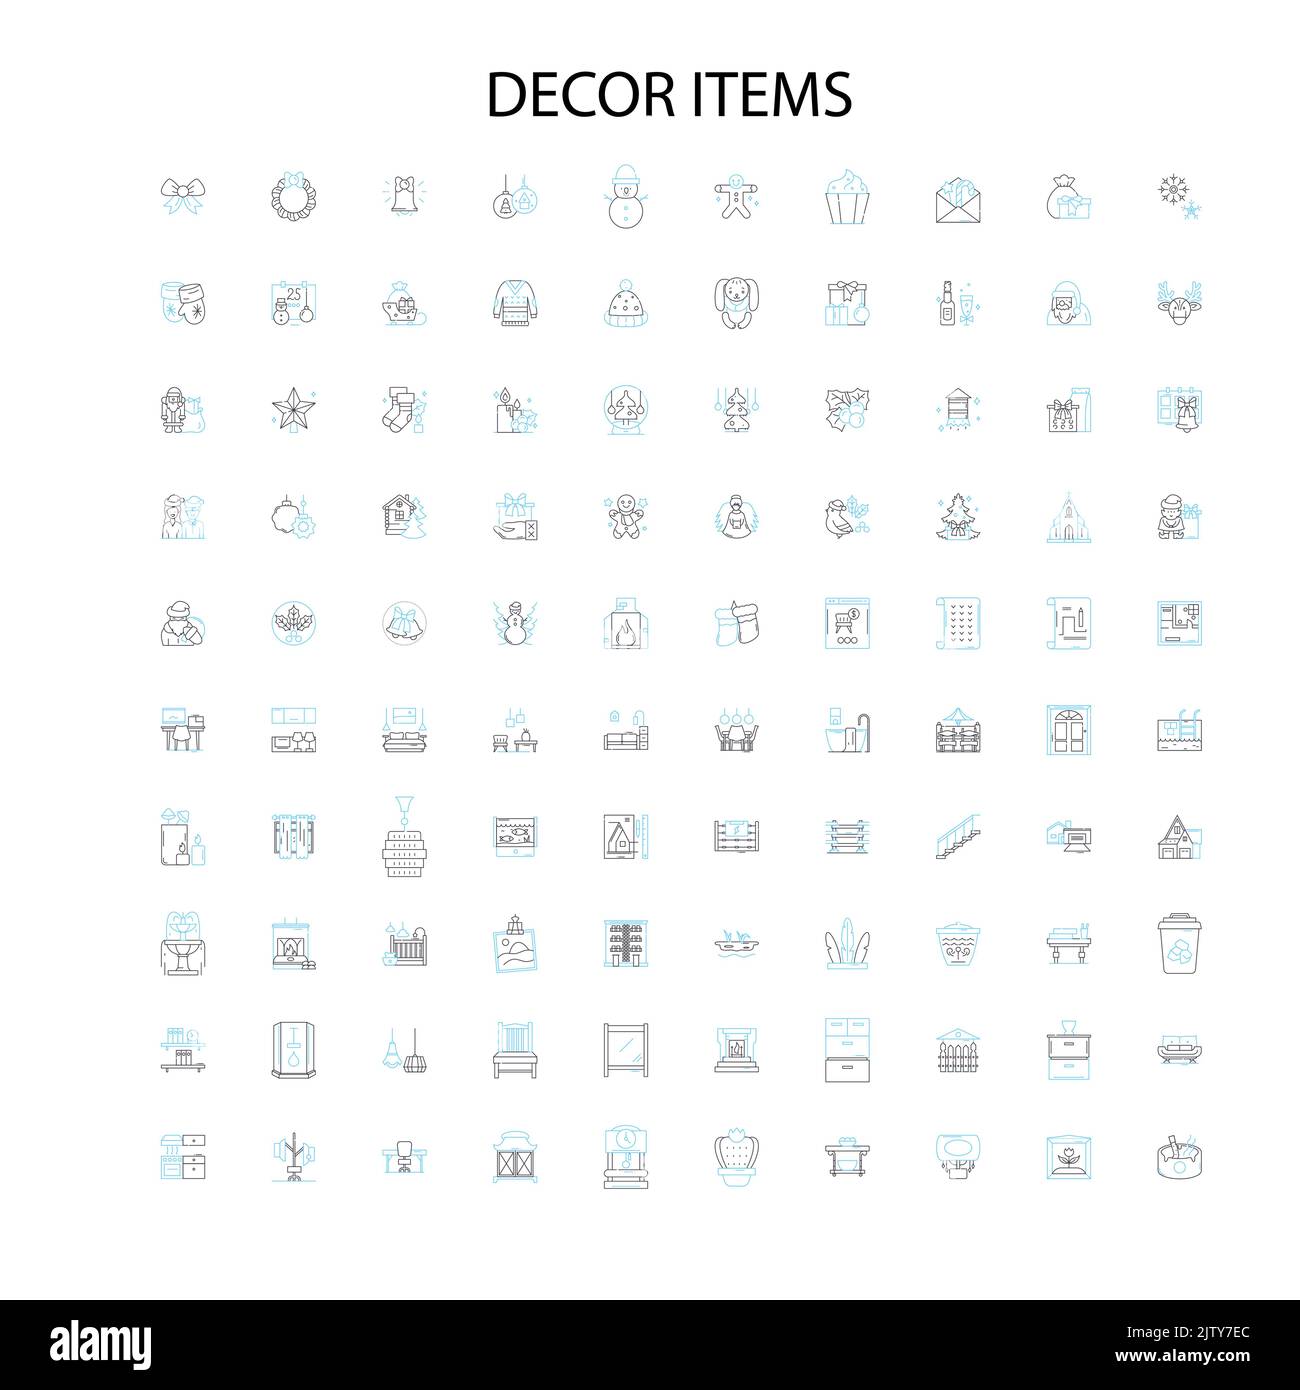 decor items icons, signs, outline symbols, concept linear illustration line collection Stock Vector